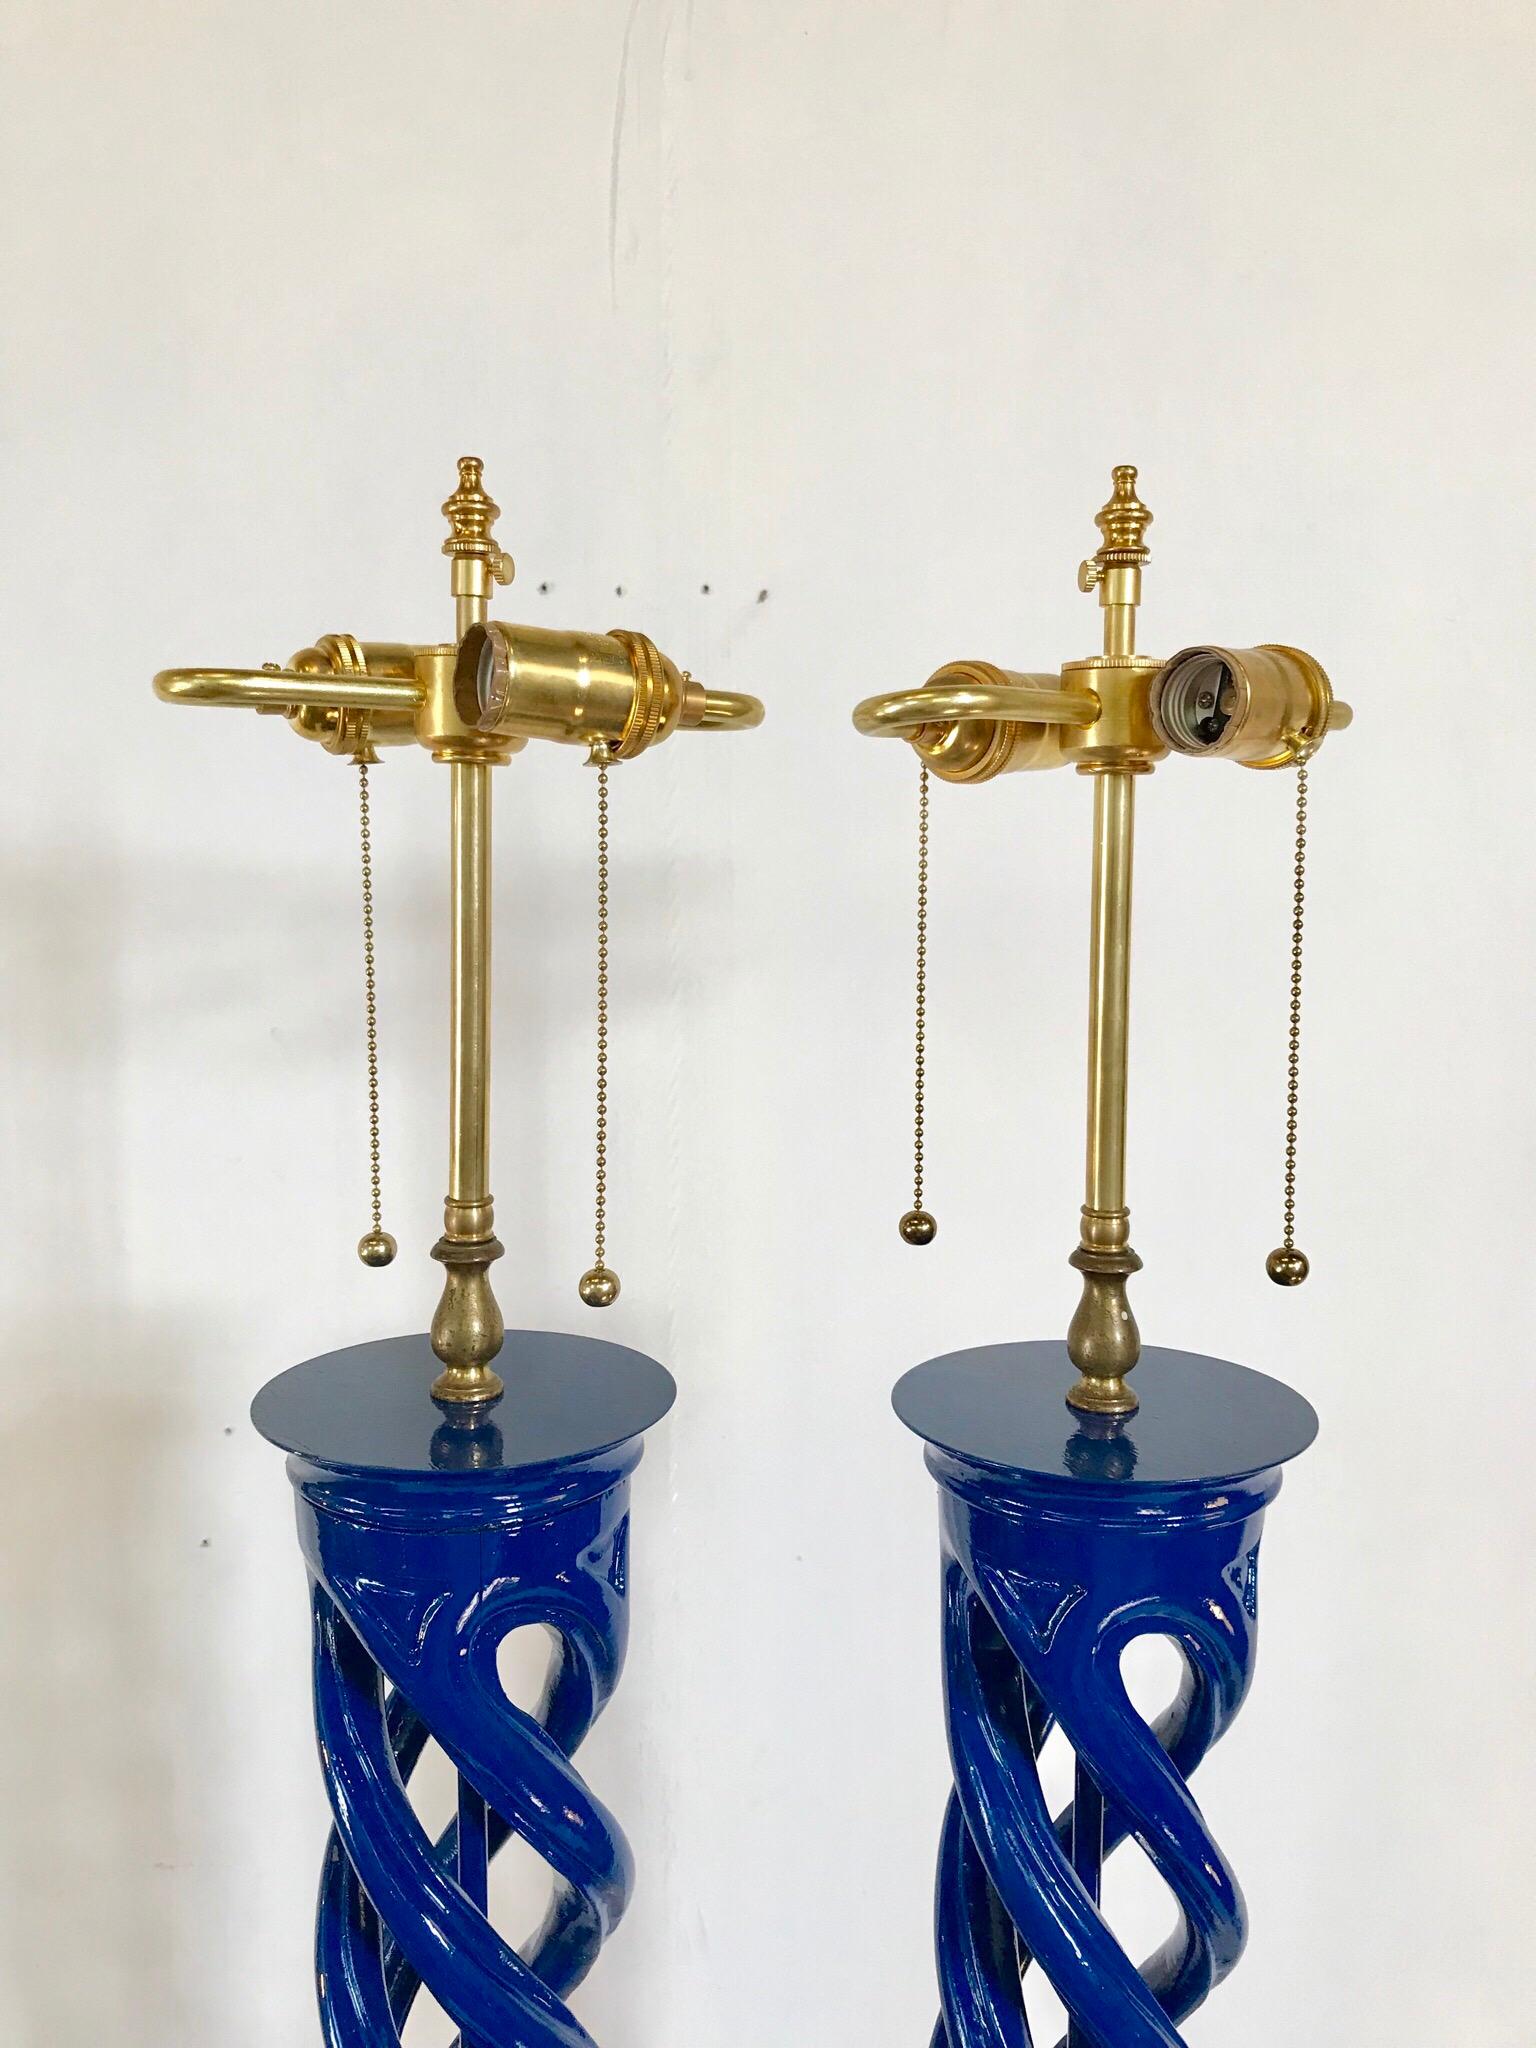 Lacquered Mid-Century Modern Frederick Cooper Double Helix Form Lamps, a Pair For Sale